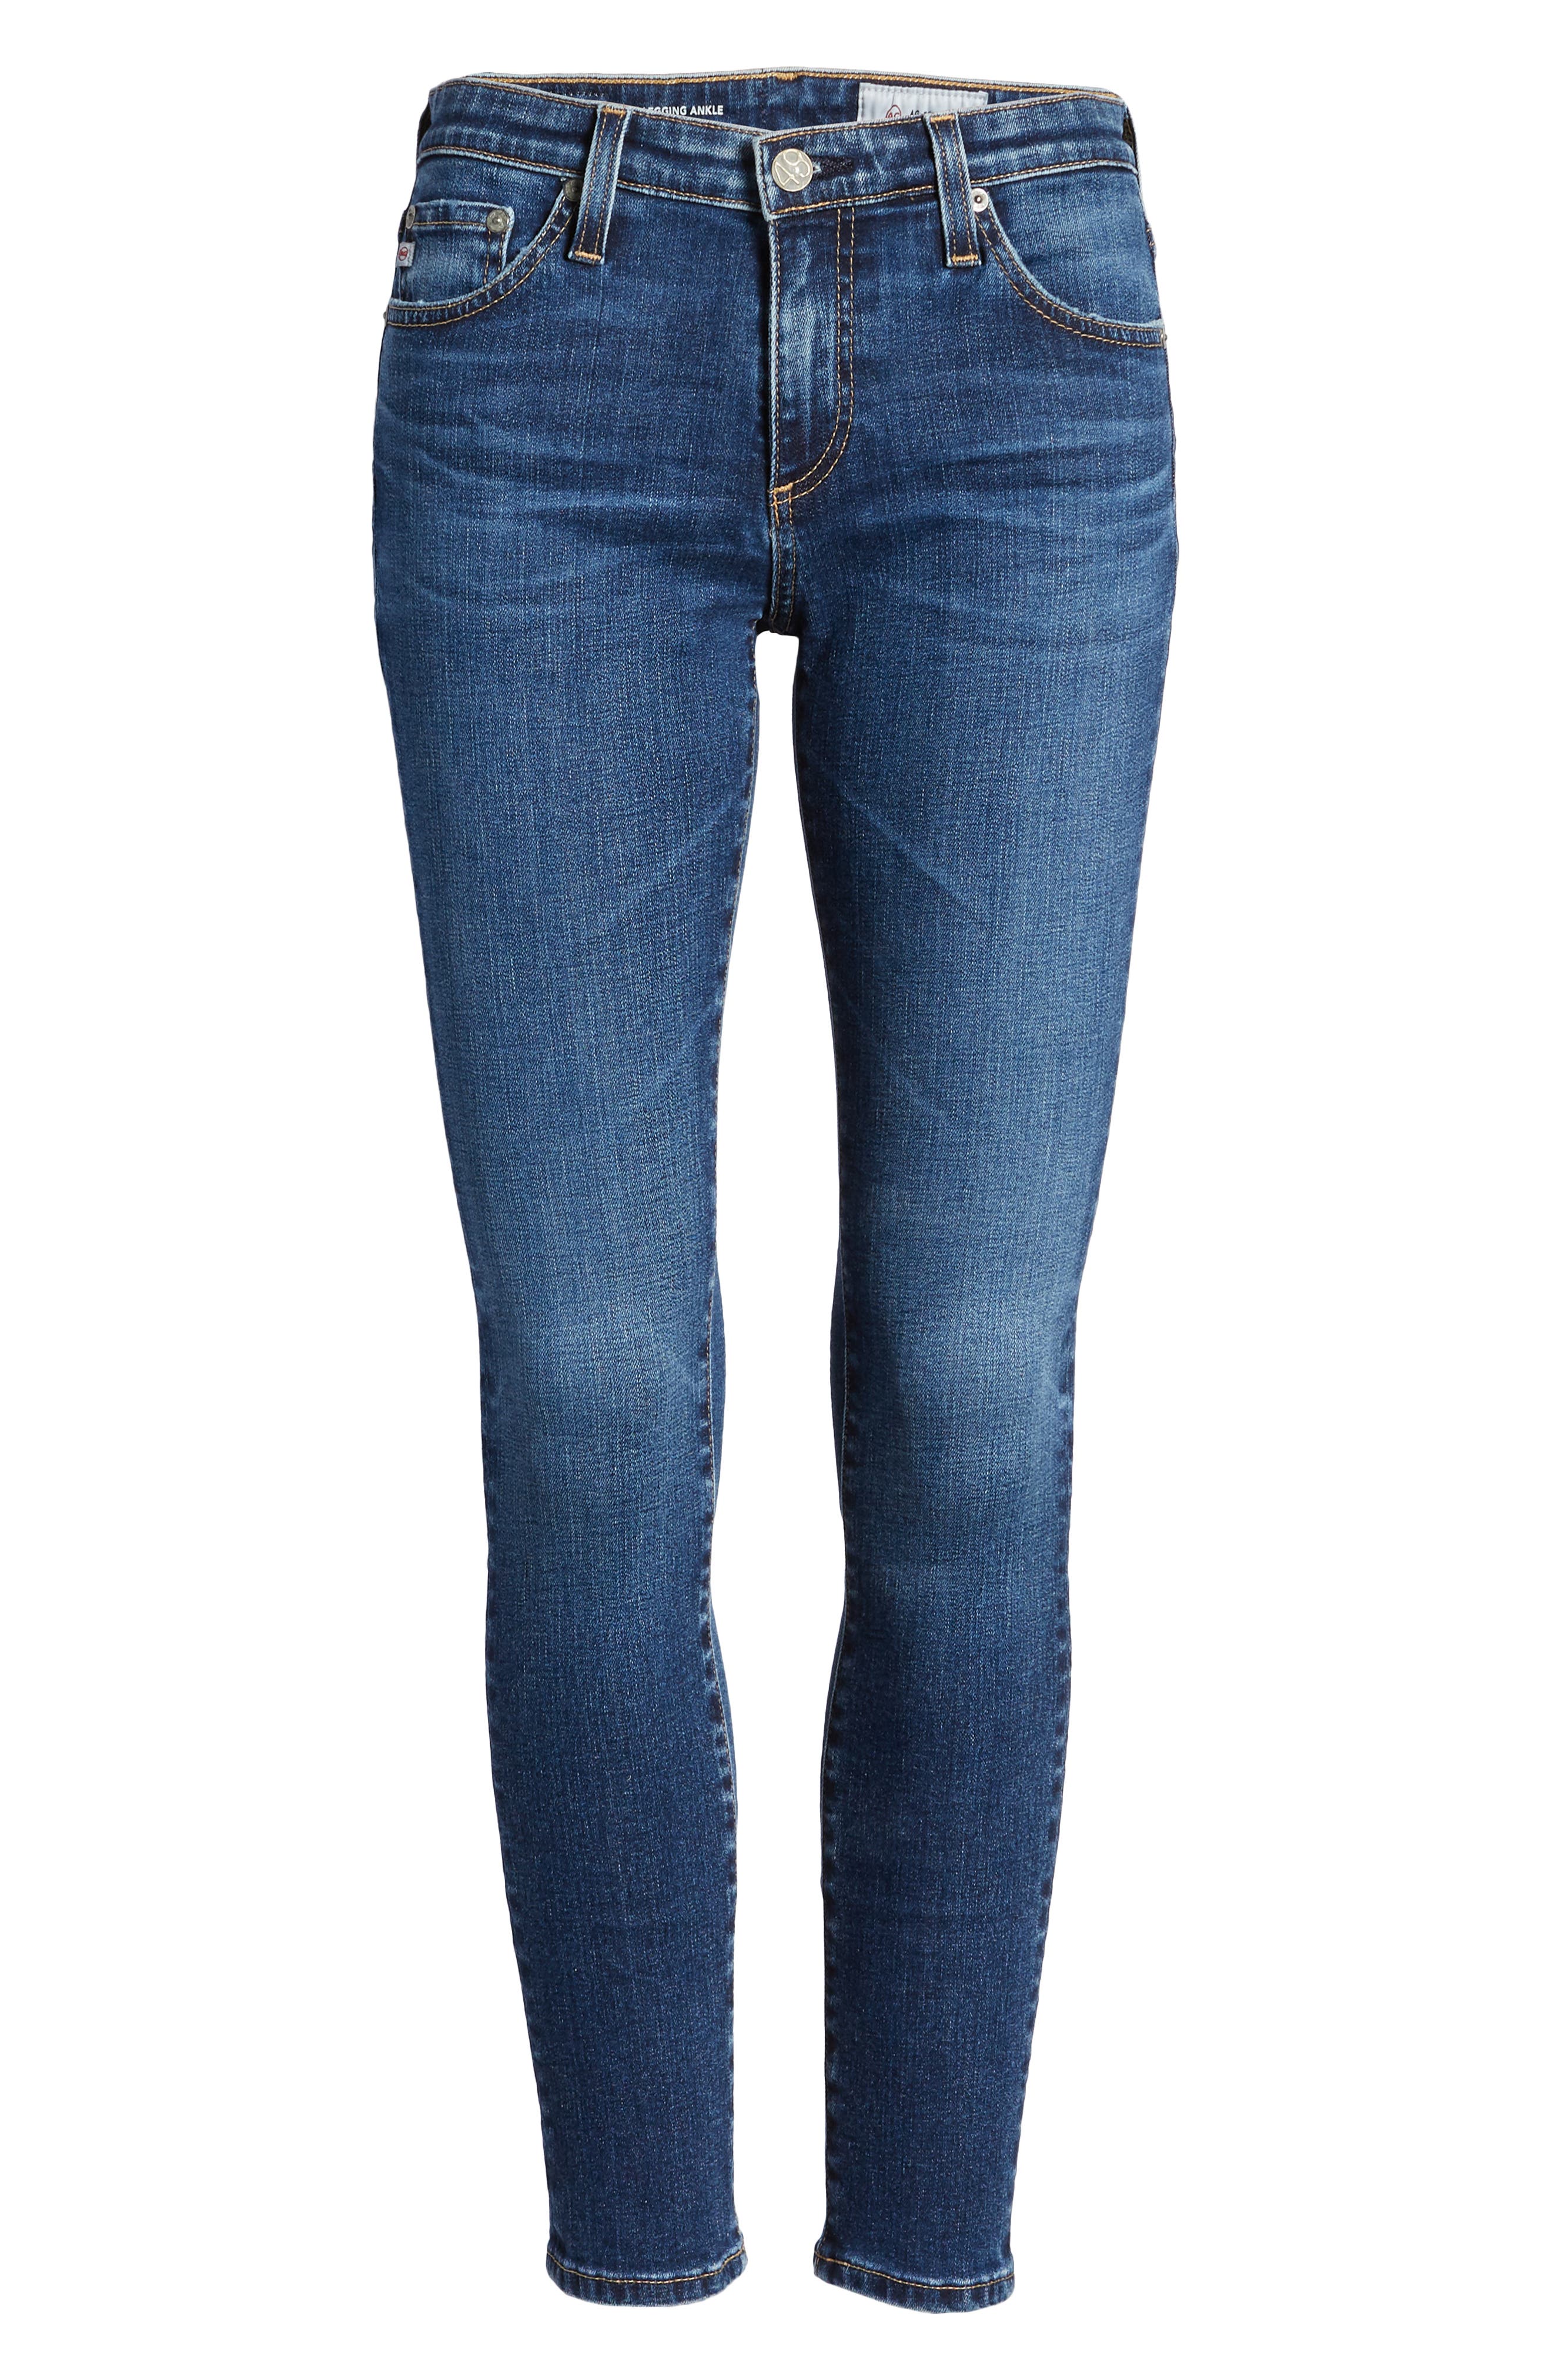 low waist ankle length jeans